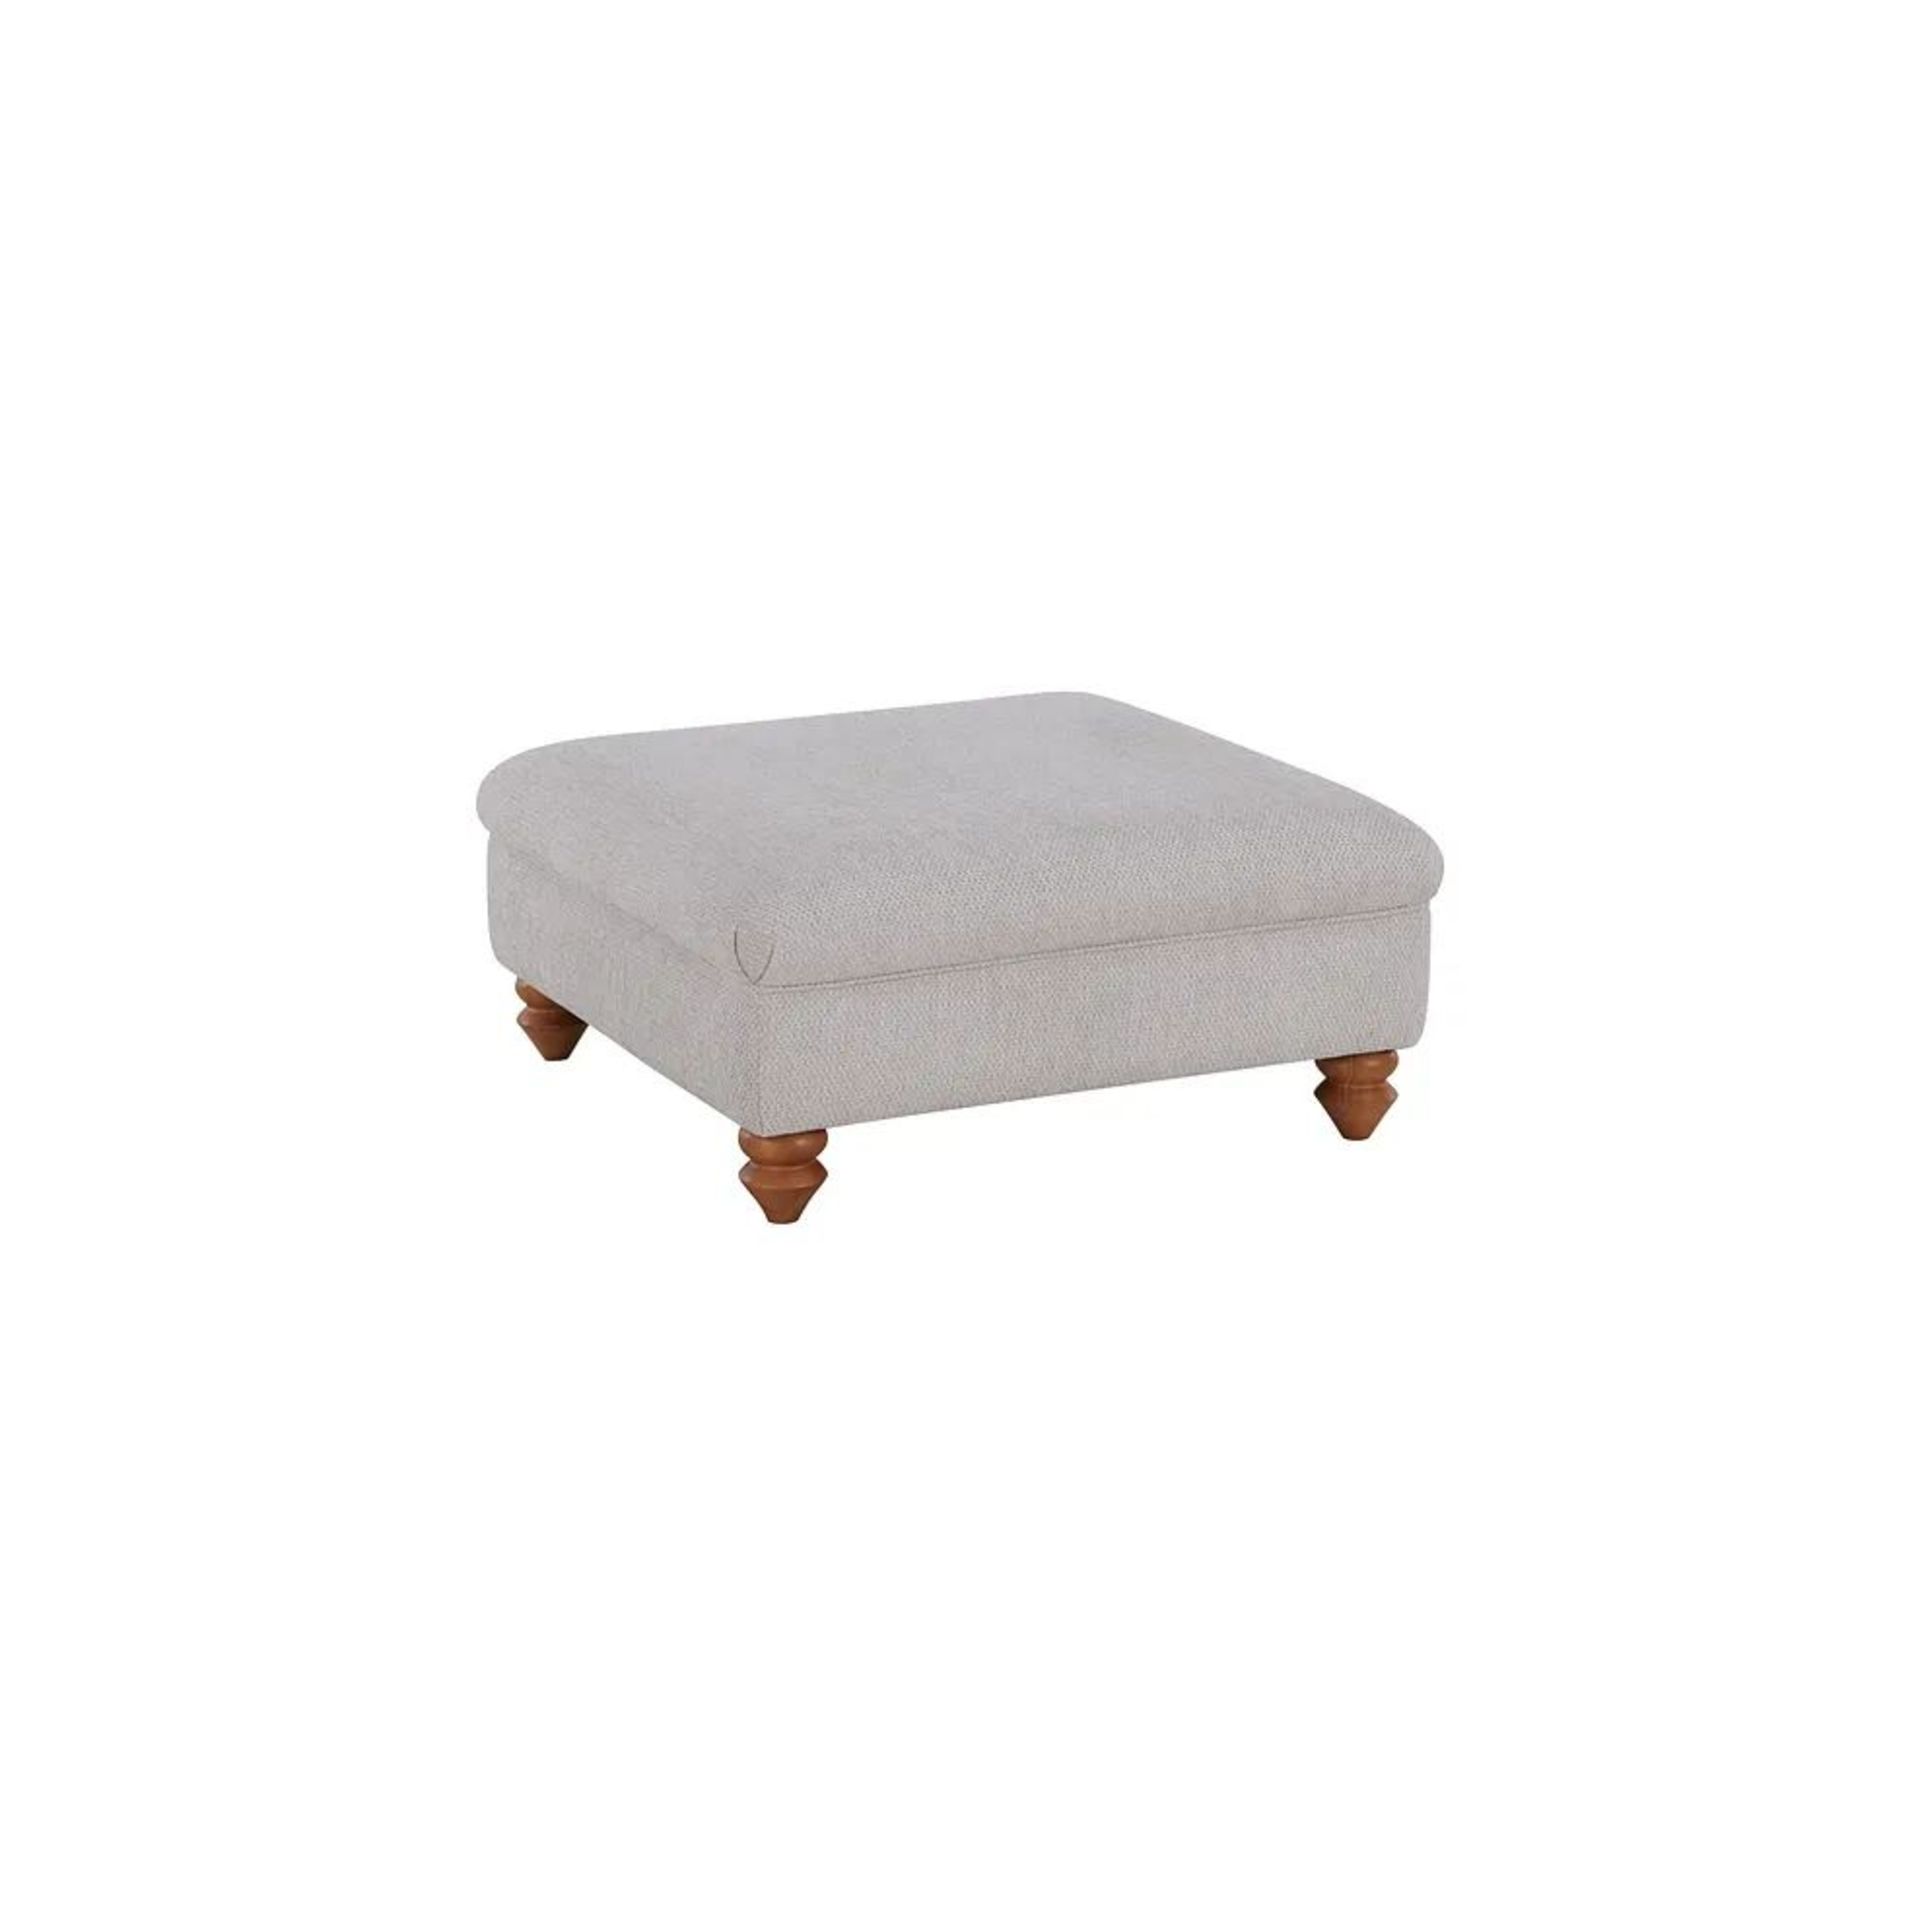 BRAND NEW GAINSBROUGH Footstool - MINERVA SILVER. RRP £369. Elegant and inviting, our Gainsborough